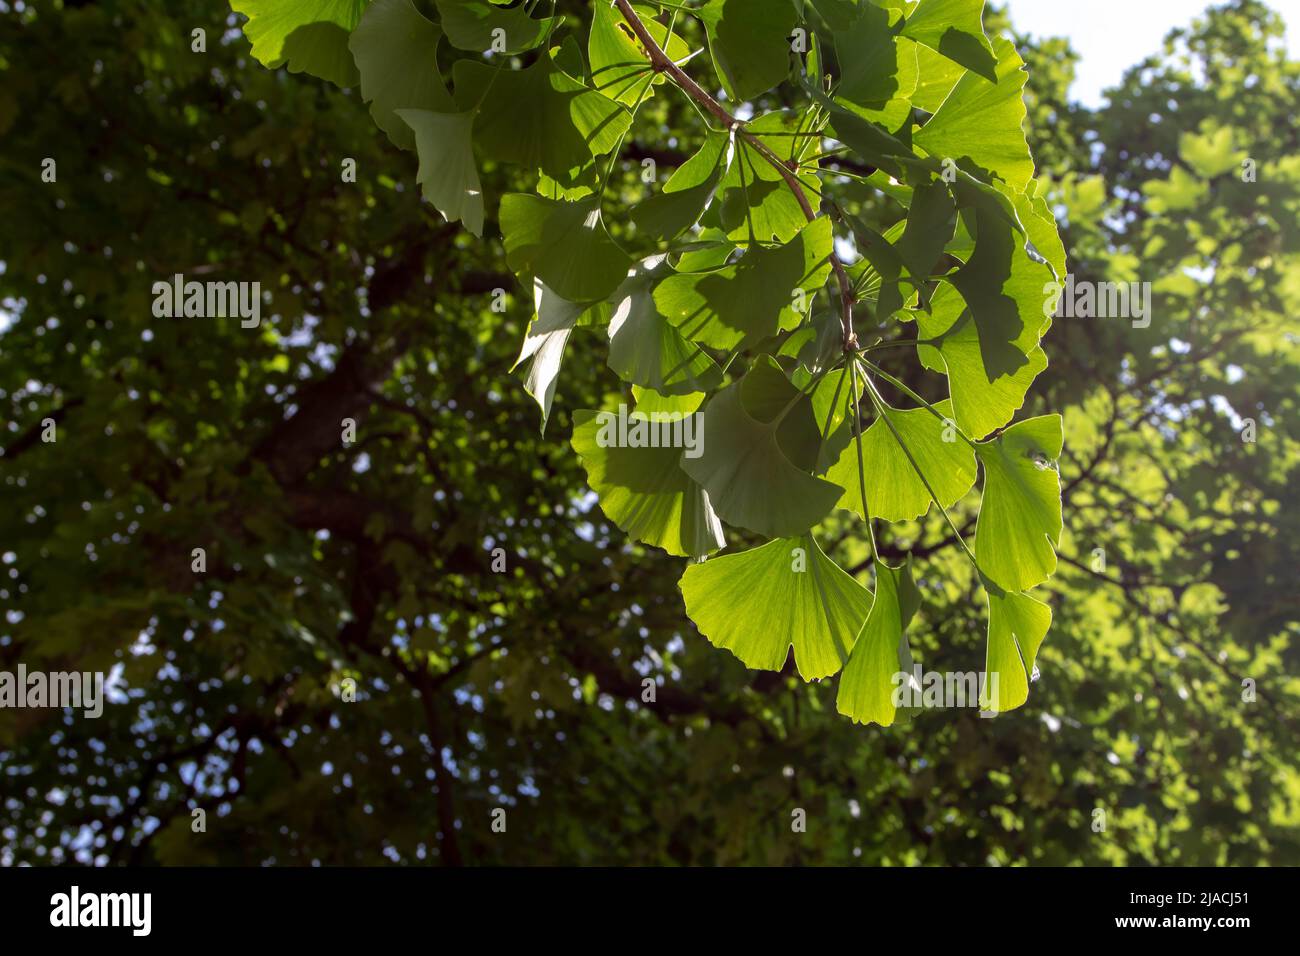 Ginkgo biloba or gingko or maidenhair decorative tree with spring green leaves in the ornamental garden Stock Photo